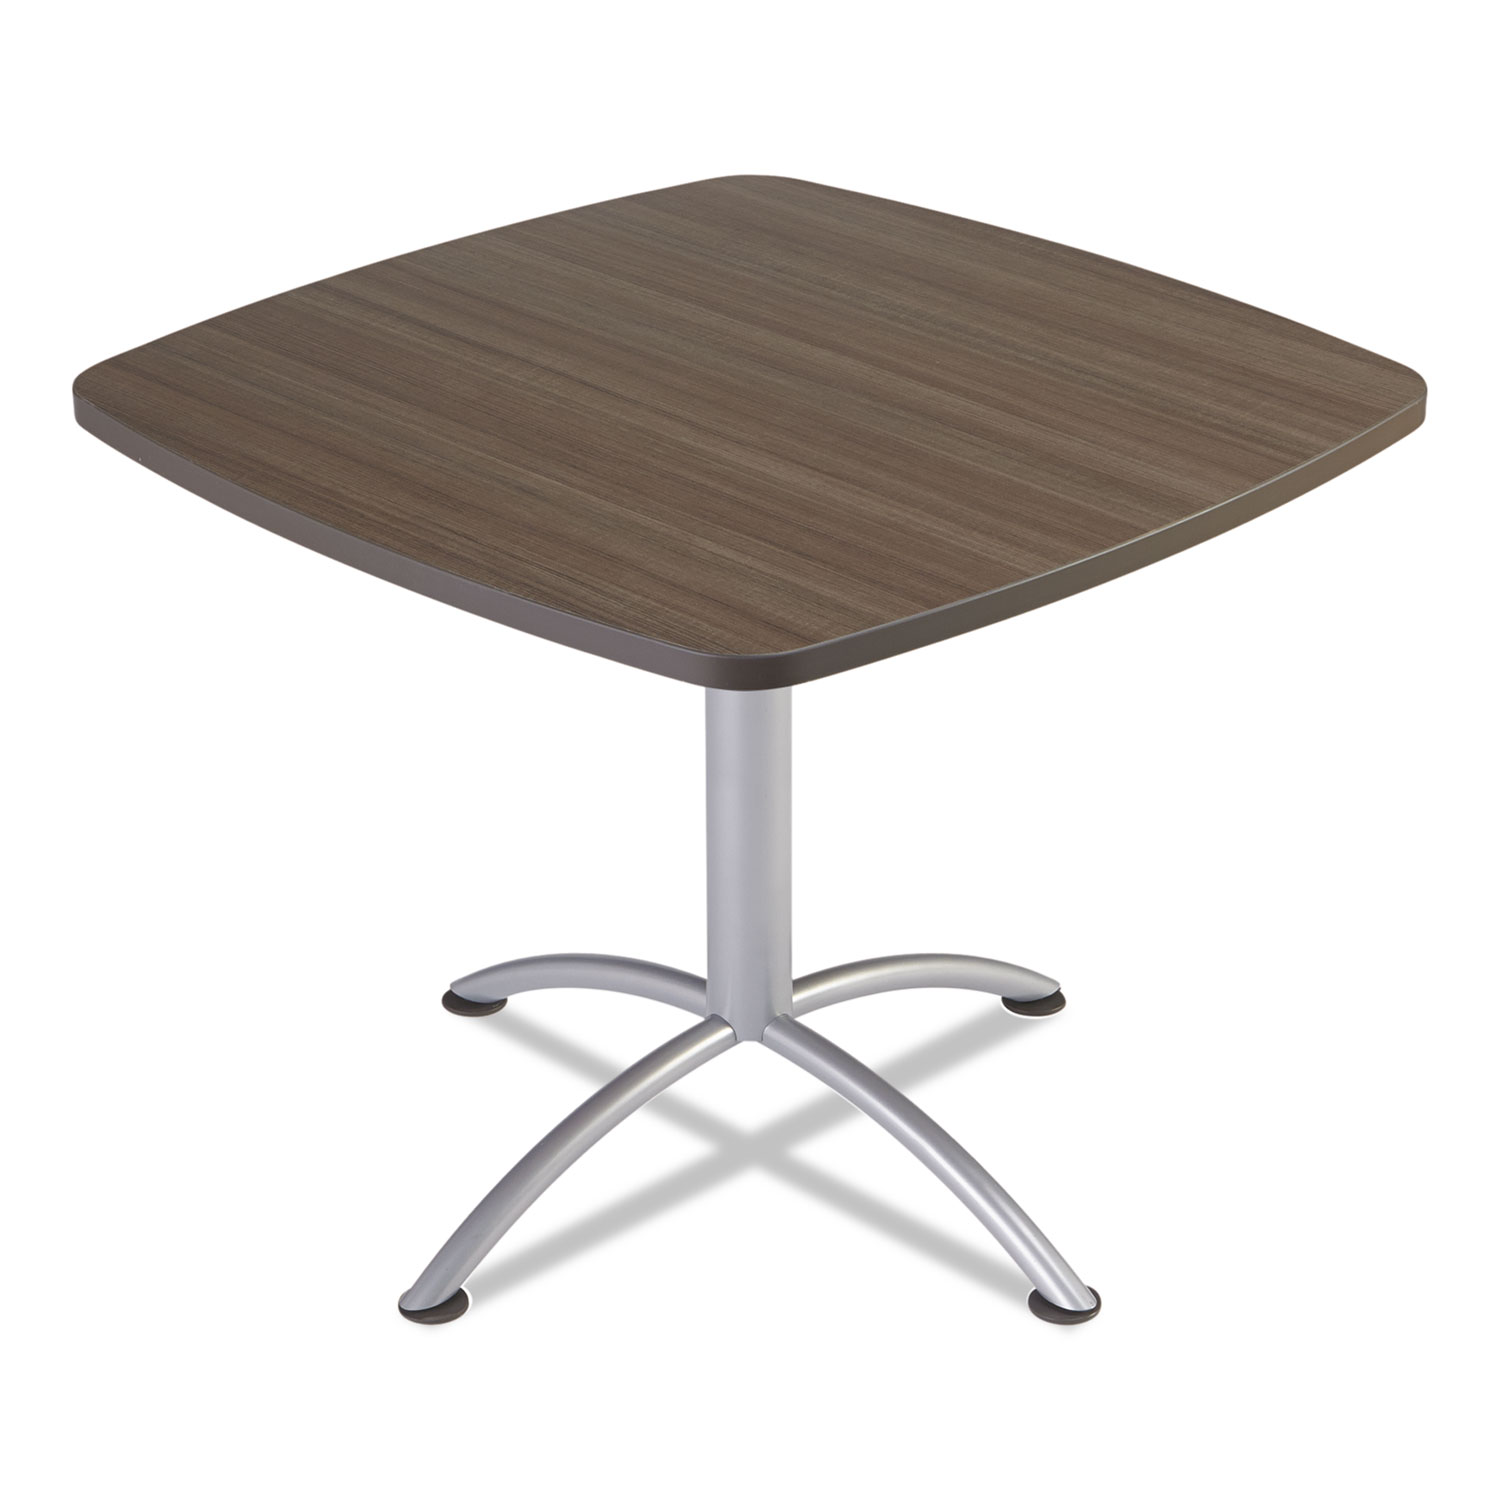 iLand Table, Contour, Square Seated Style, 36 x 36 x 29, Natural Teak/Silver